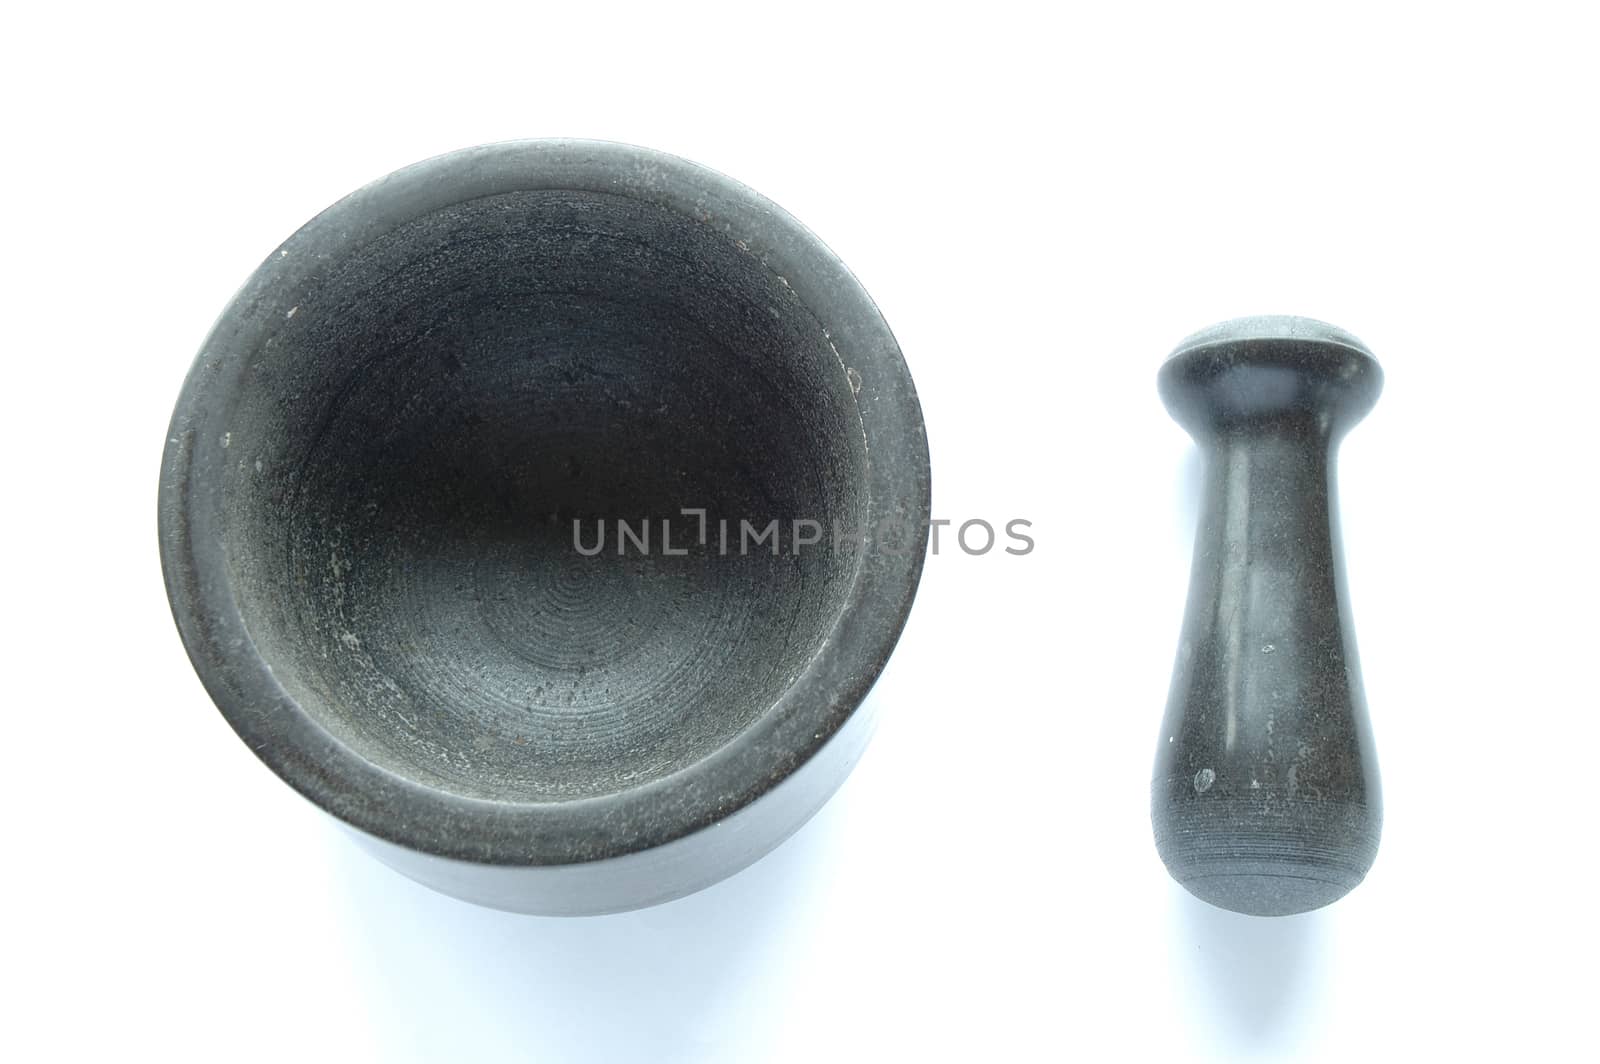 Mortar and pestle by janhetman